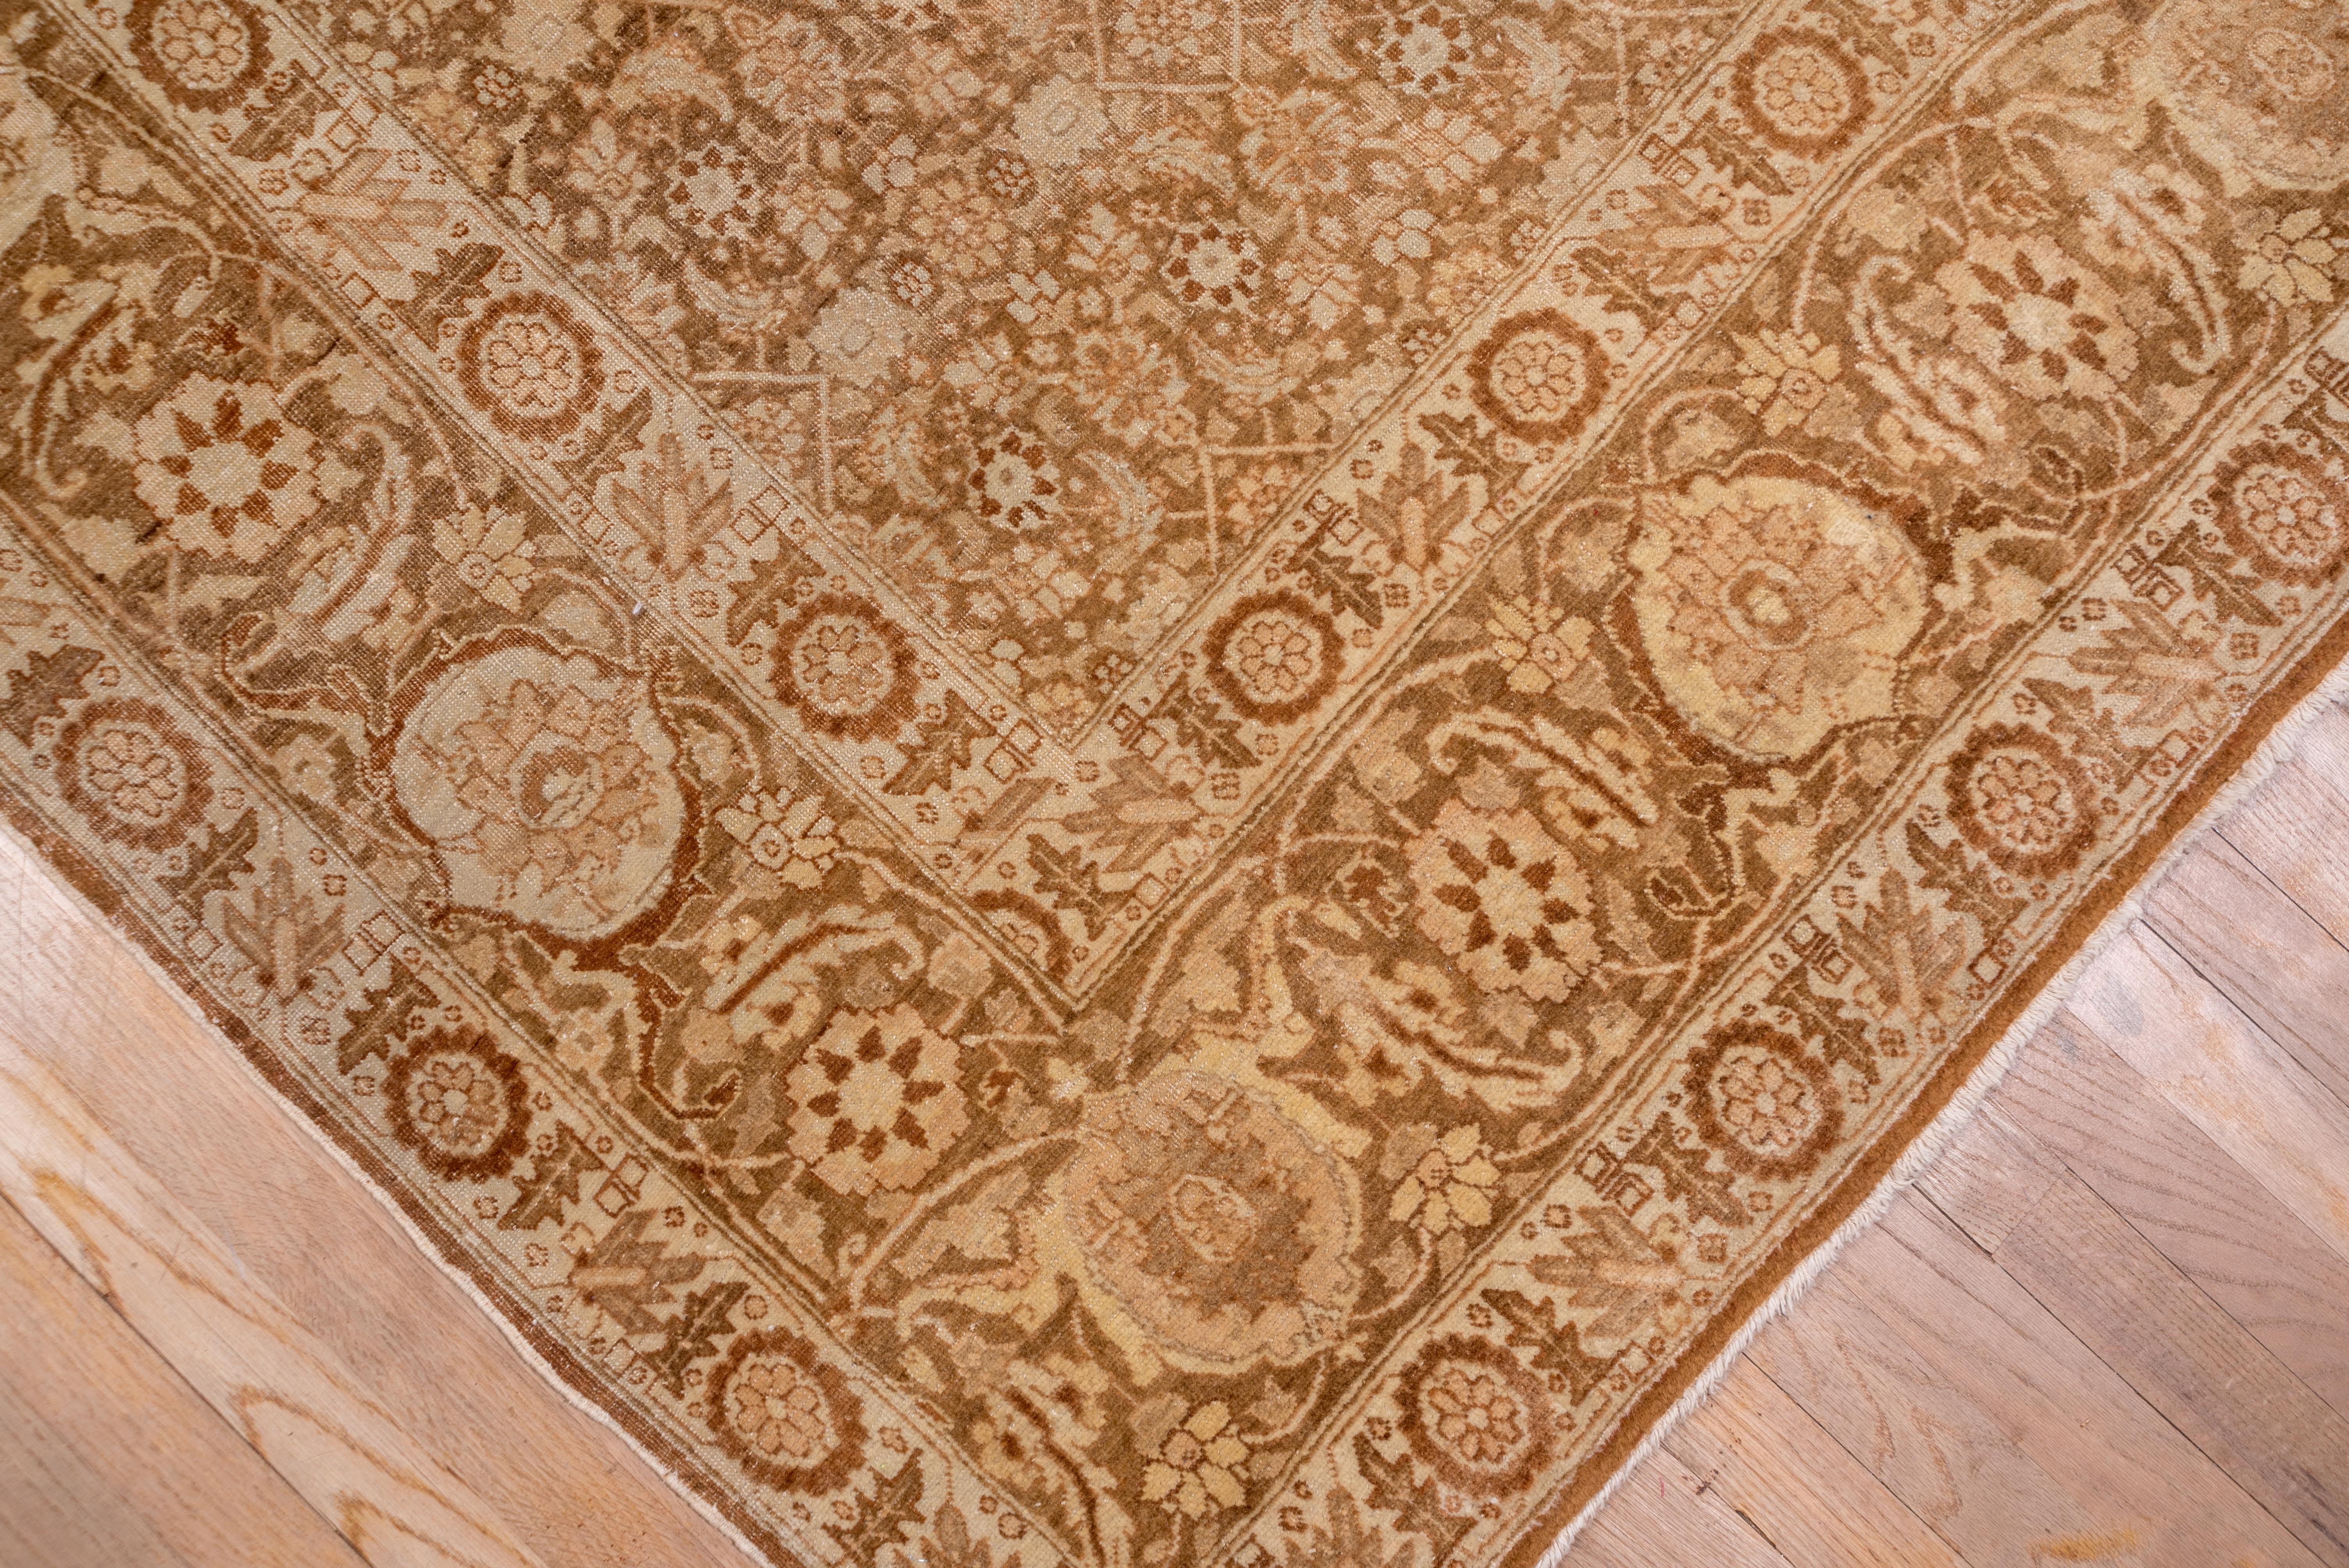 Antique Tabriz Carpet, Bookcover Field In Excellent Condition For Sale In New York, NY